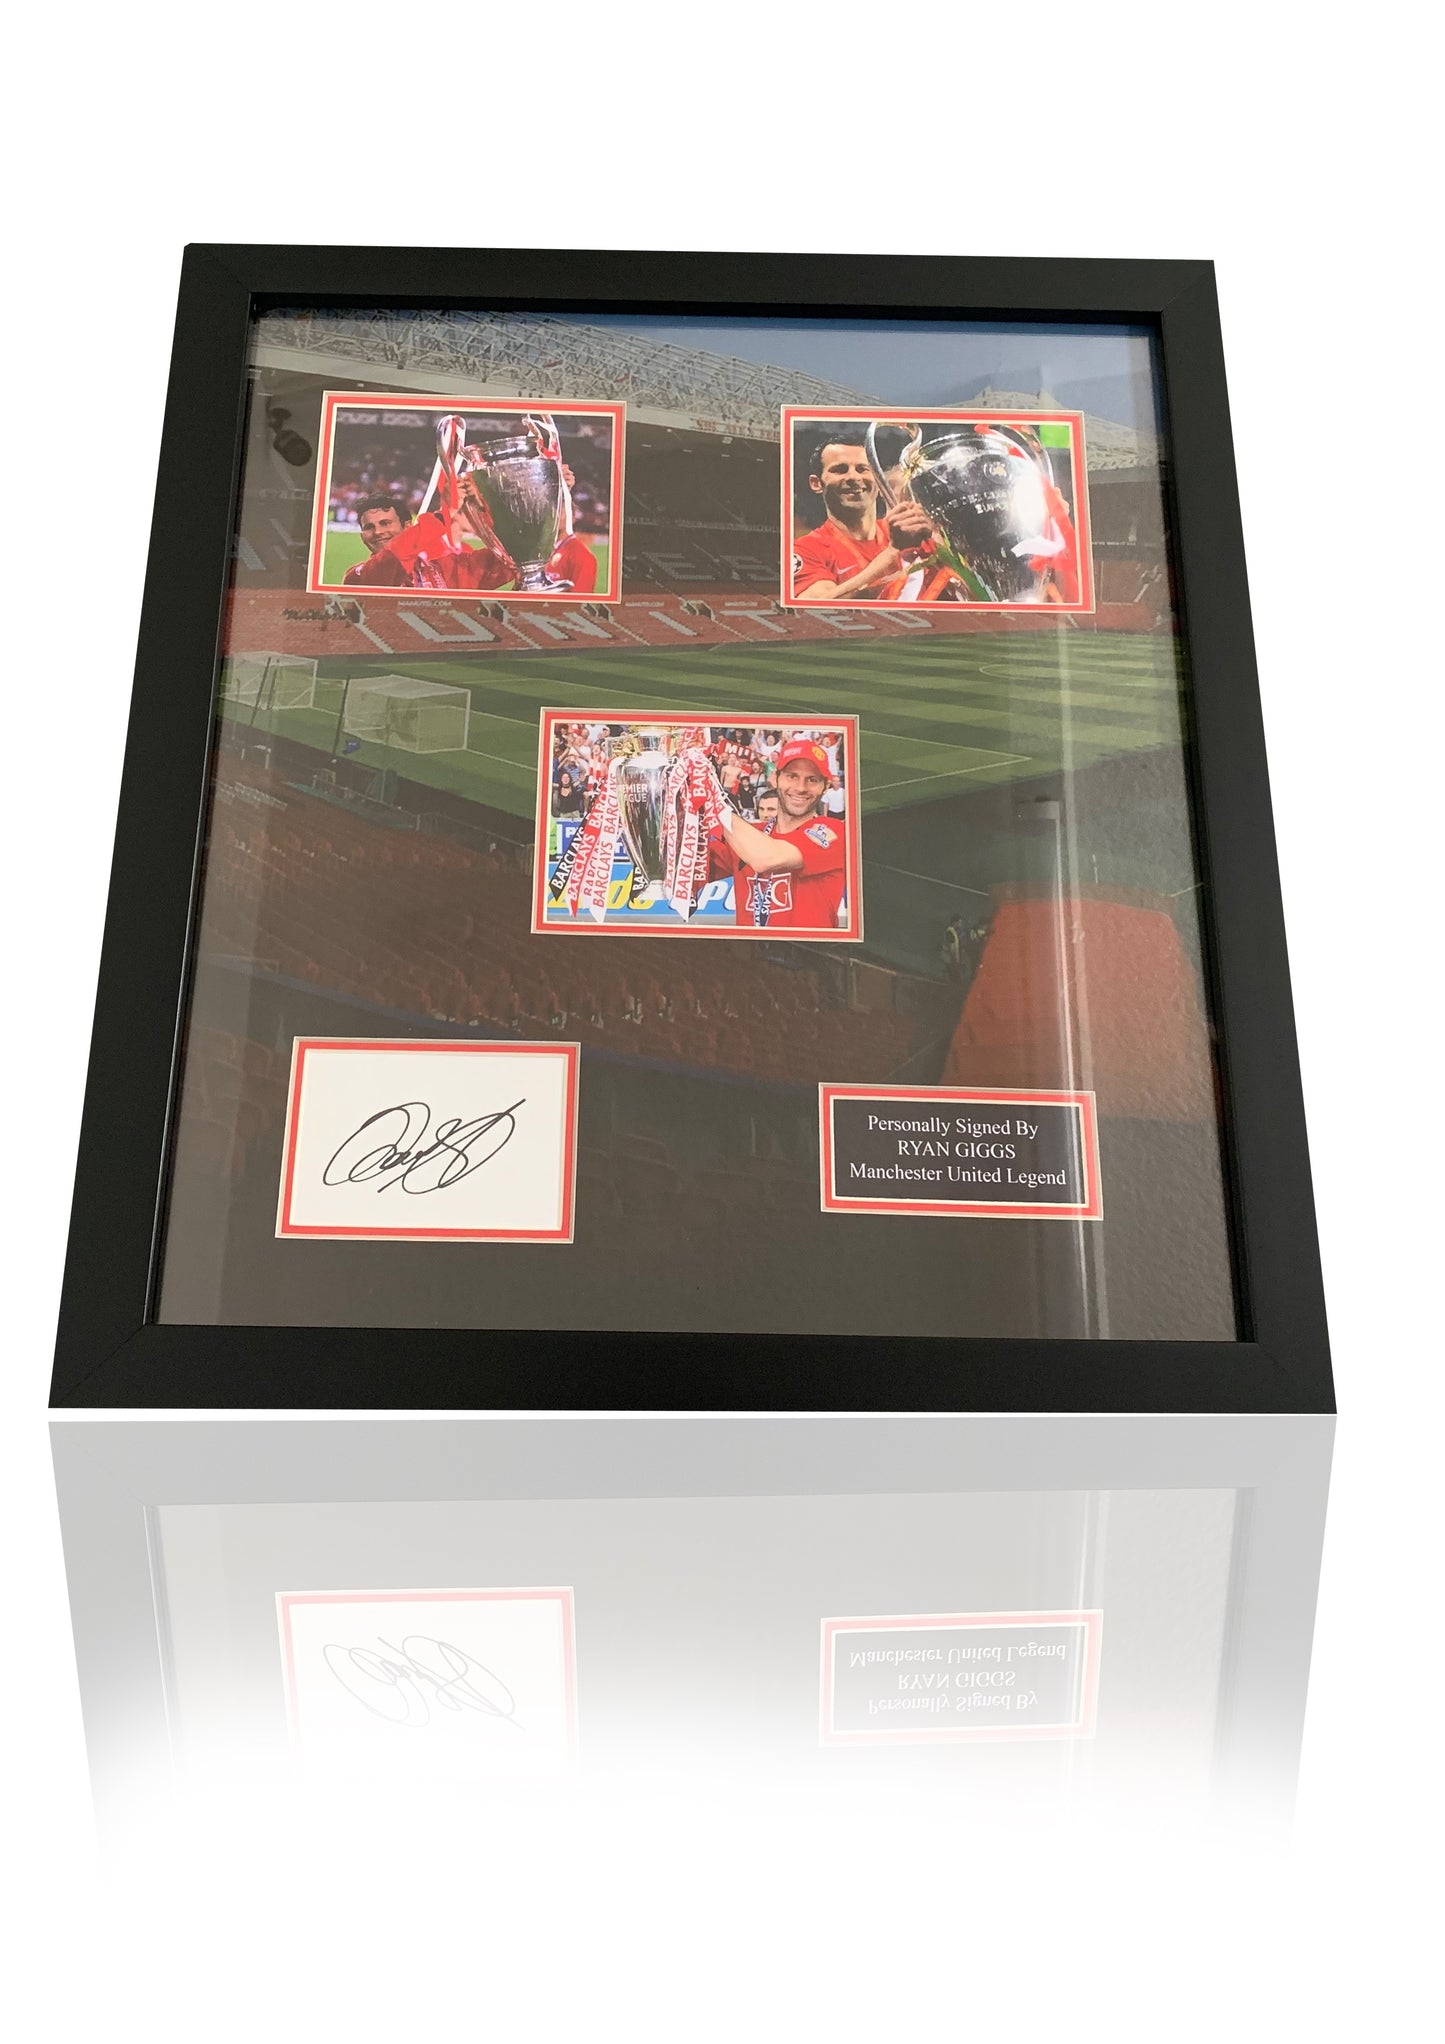 Ryan Giggs Manchester United signed framed photo montage